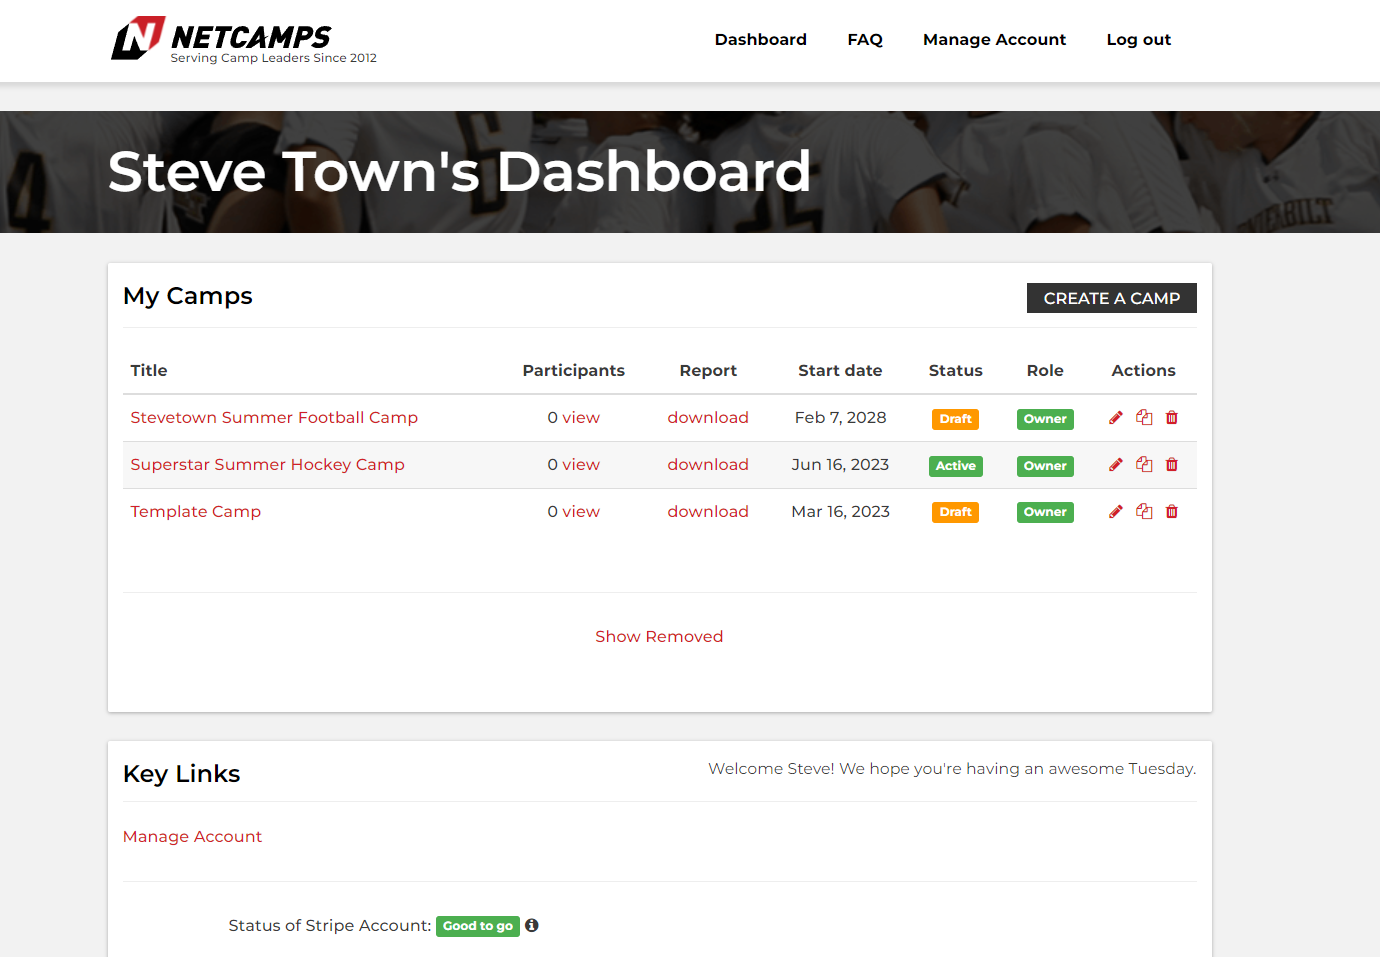 User Dashboard. Contains list of all active and prior camps, registration counts, as well as action buttons to download reports and edit camps.